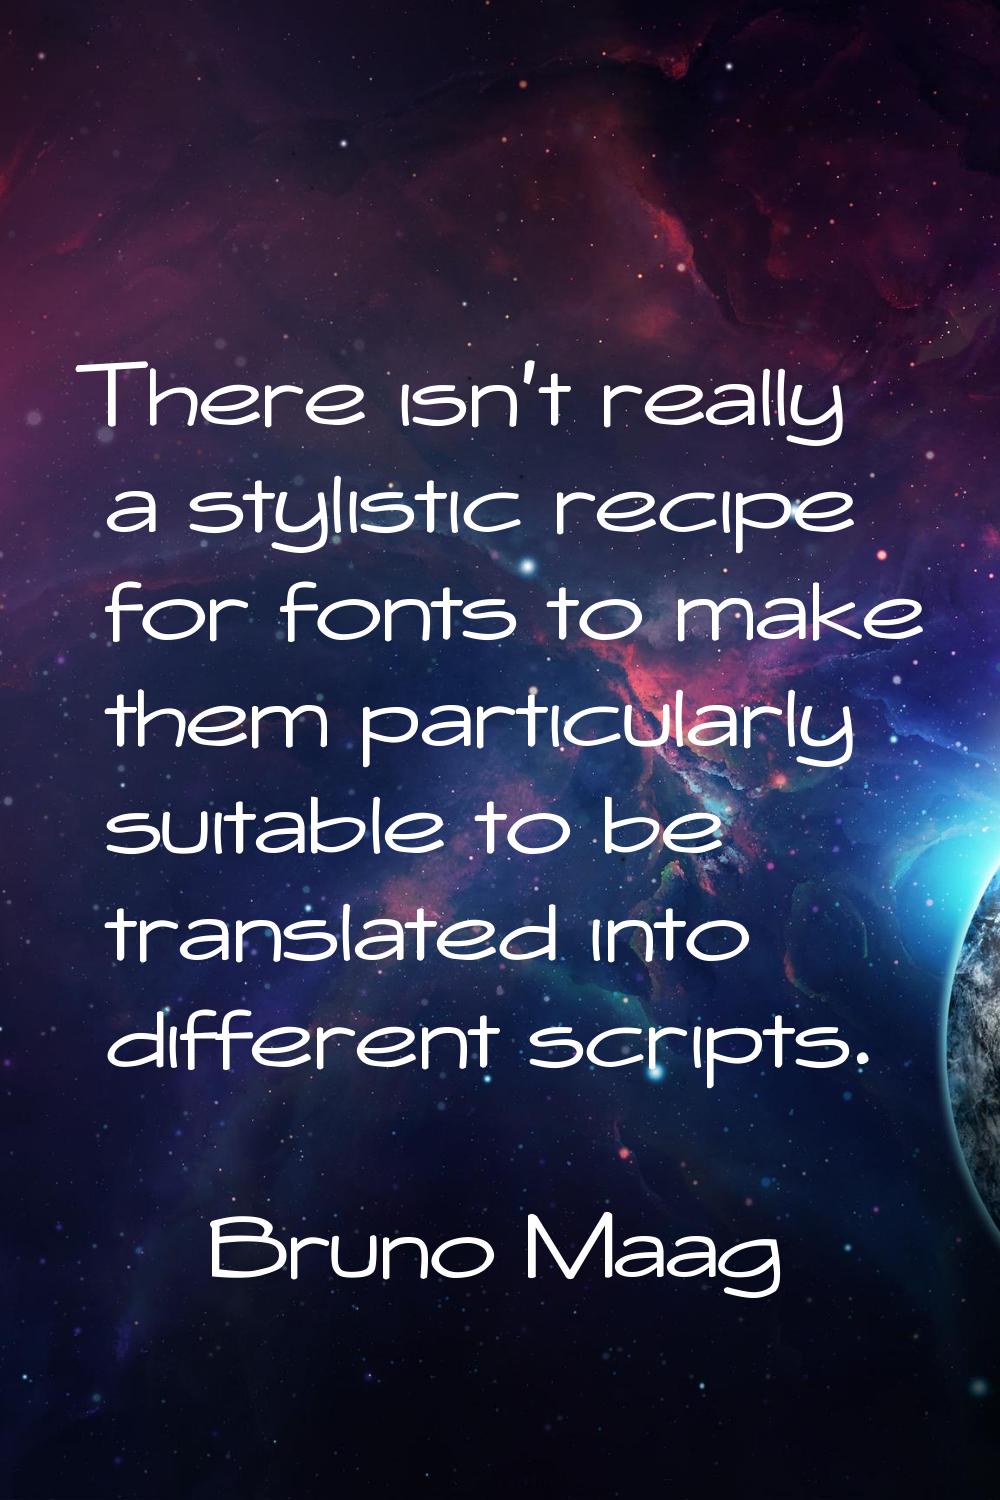 There isn't really a stylistic recipe for fonts to make them particularly suitable to be translated